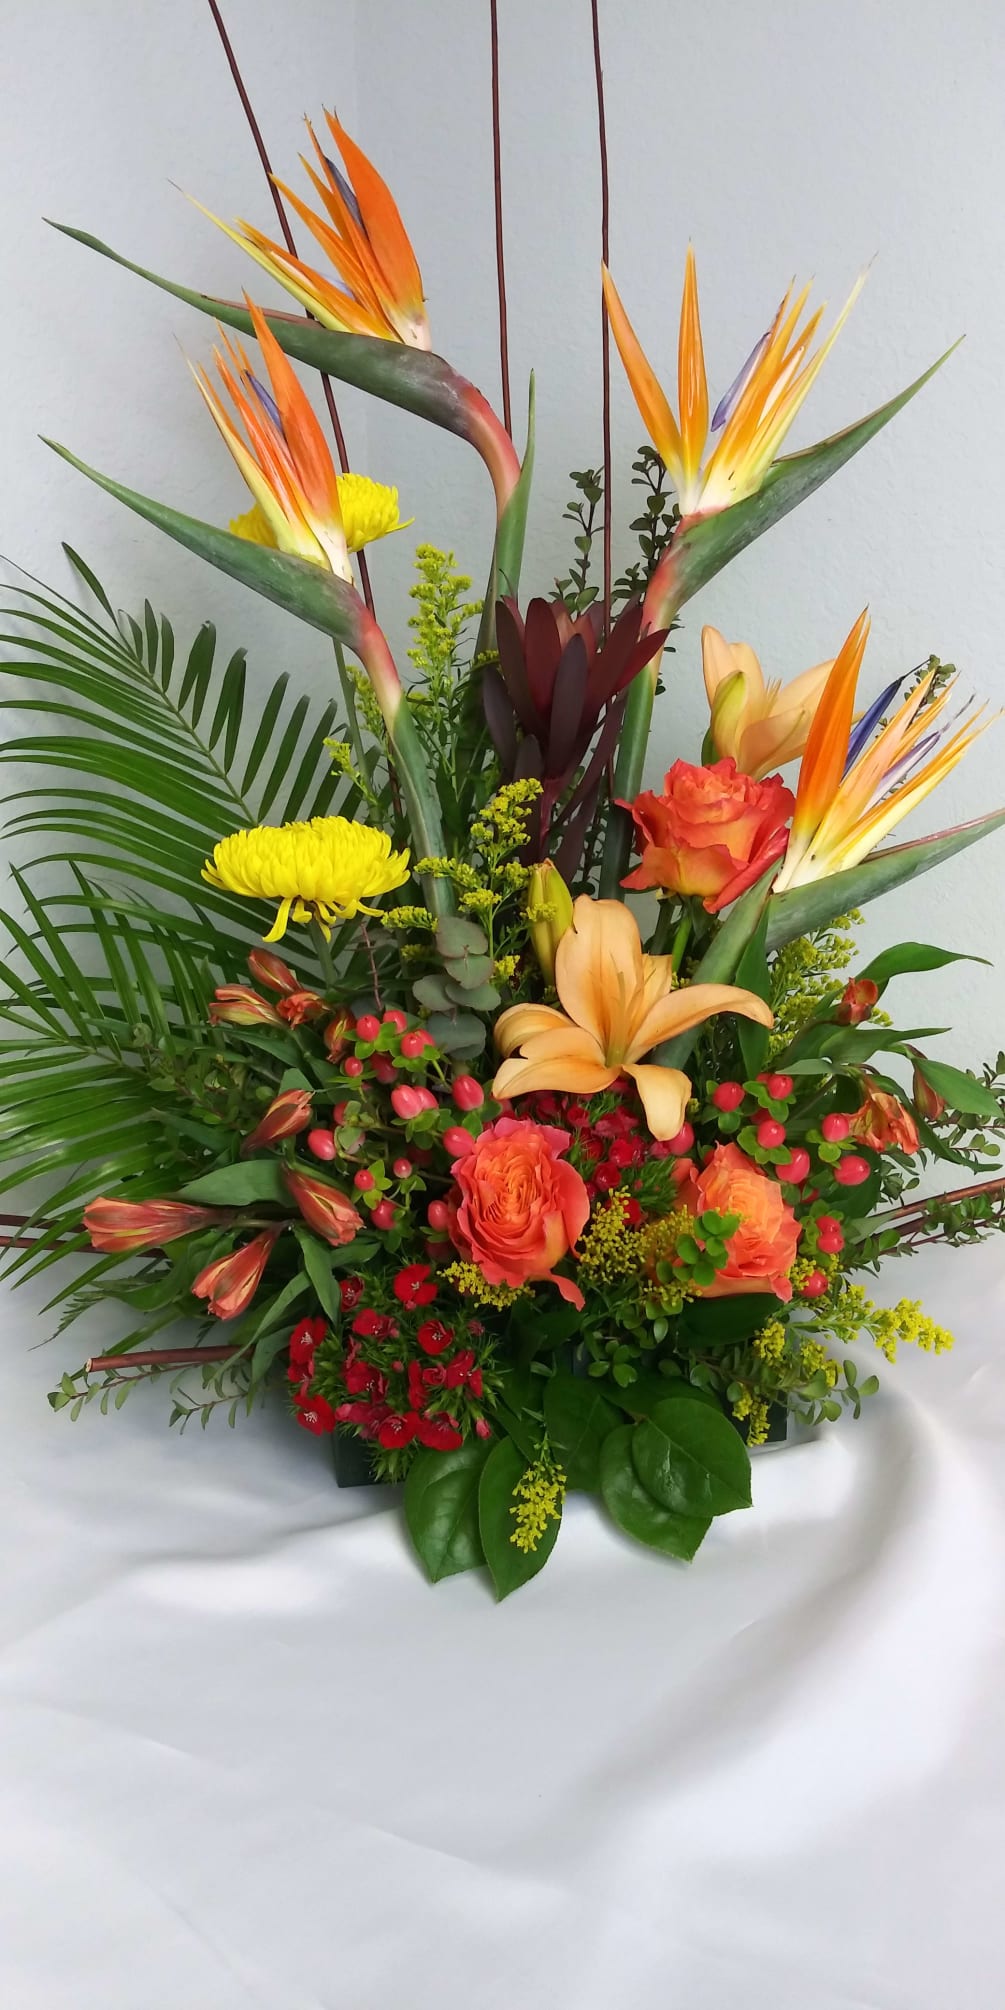 Tropical arrangement in oranges, yellows and reds with bird of paradise, orange